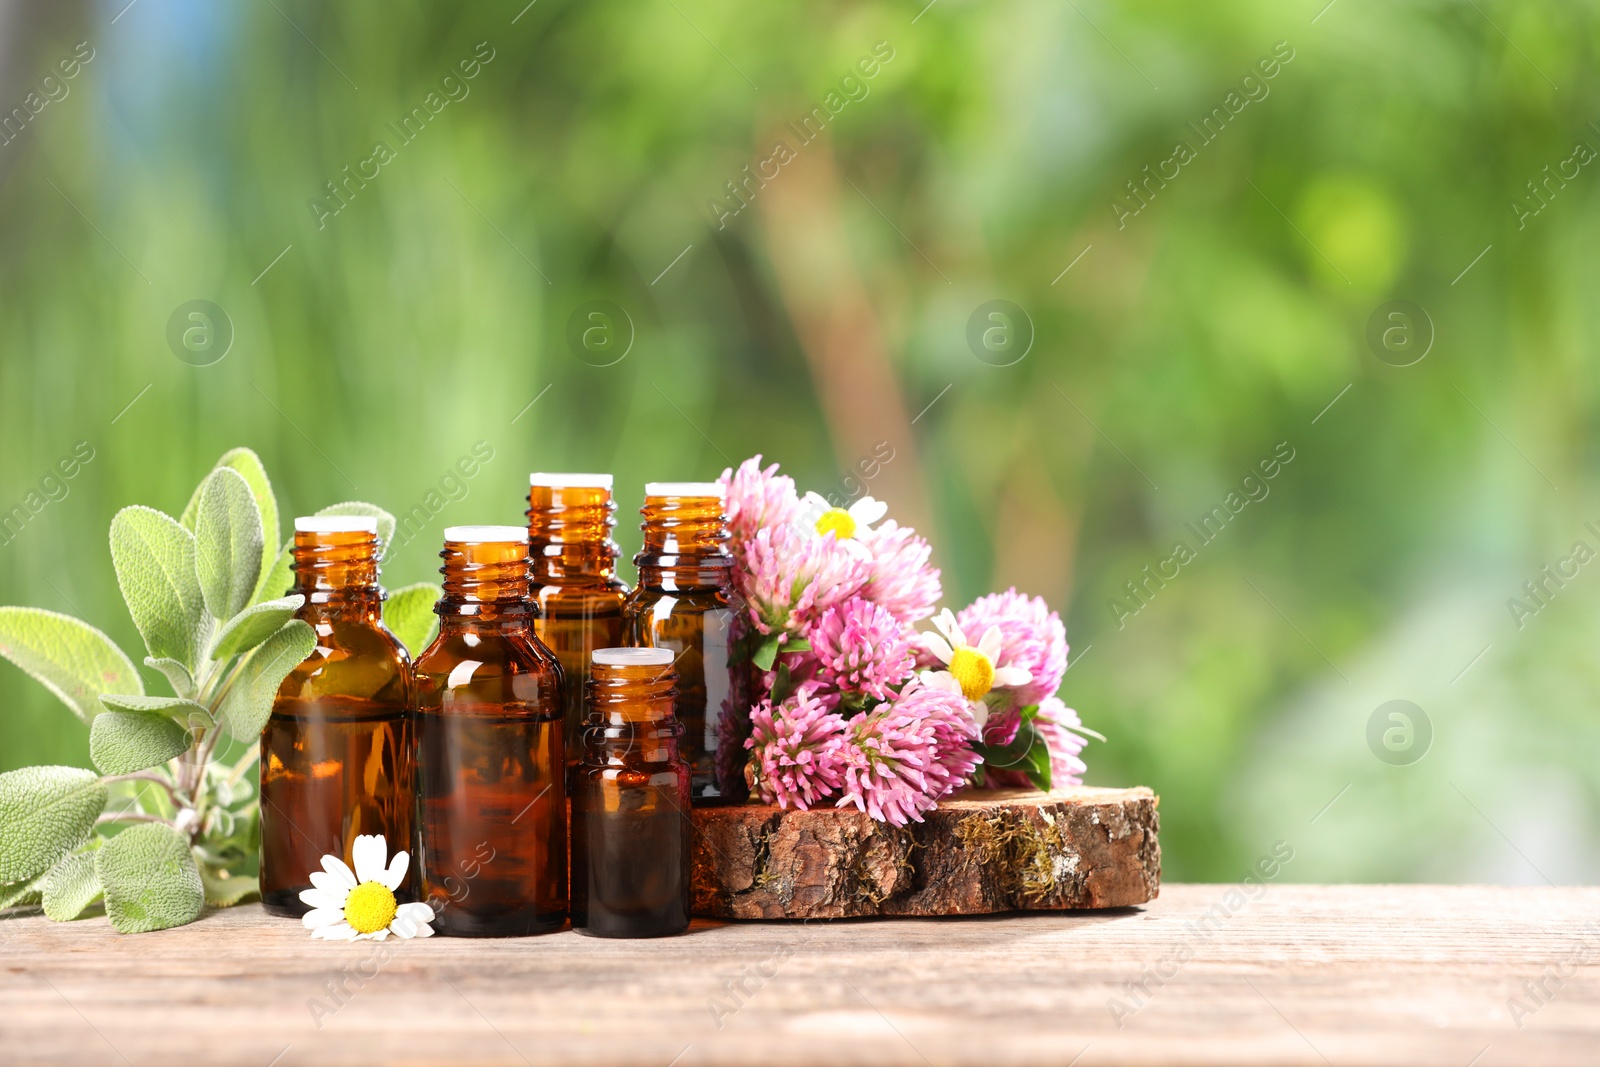 Photo of Bottles with essential oils, herb and flowers on wooden table against blurred green background. Space for text